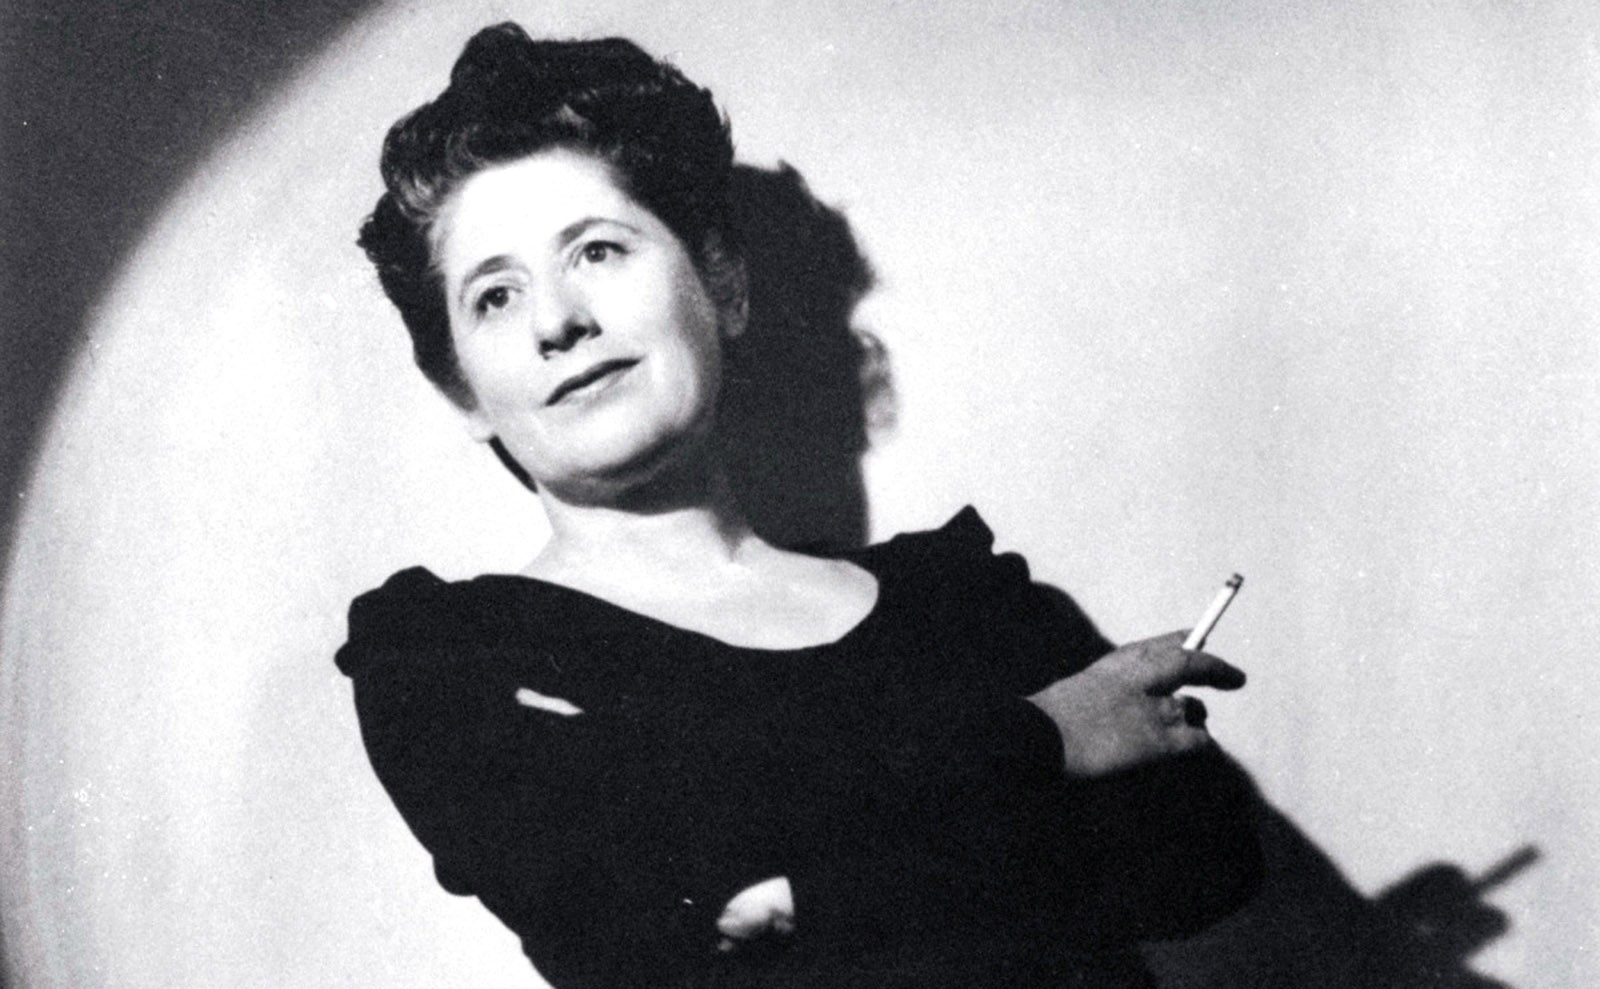 11 Cool Facts You Need to Know about Ngaio Marsh, the Kiwi 'Queen of Crime'